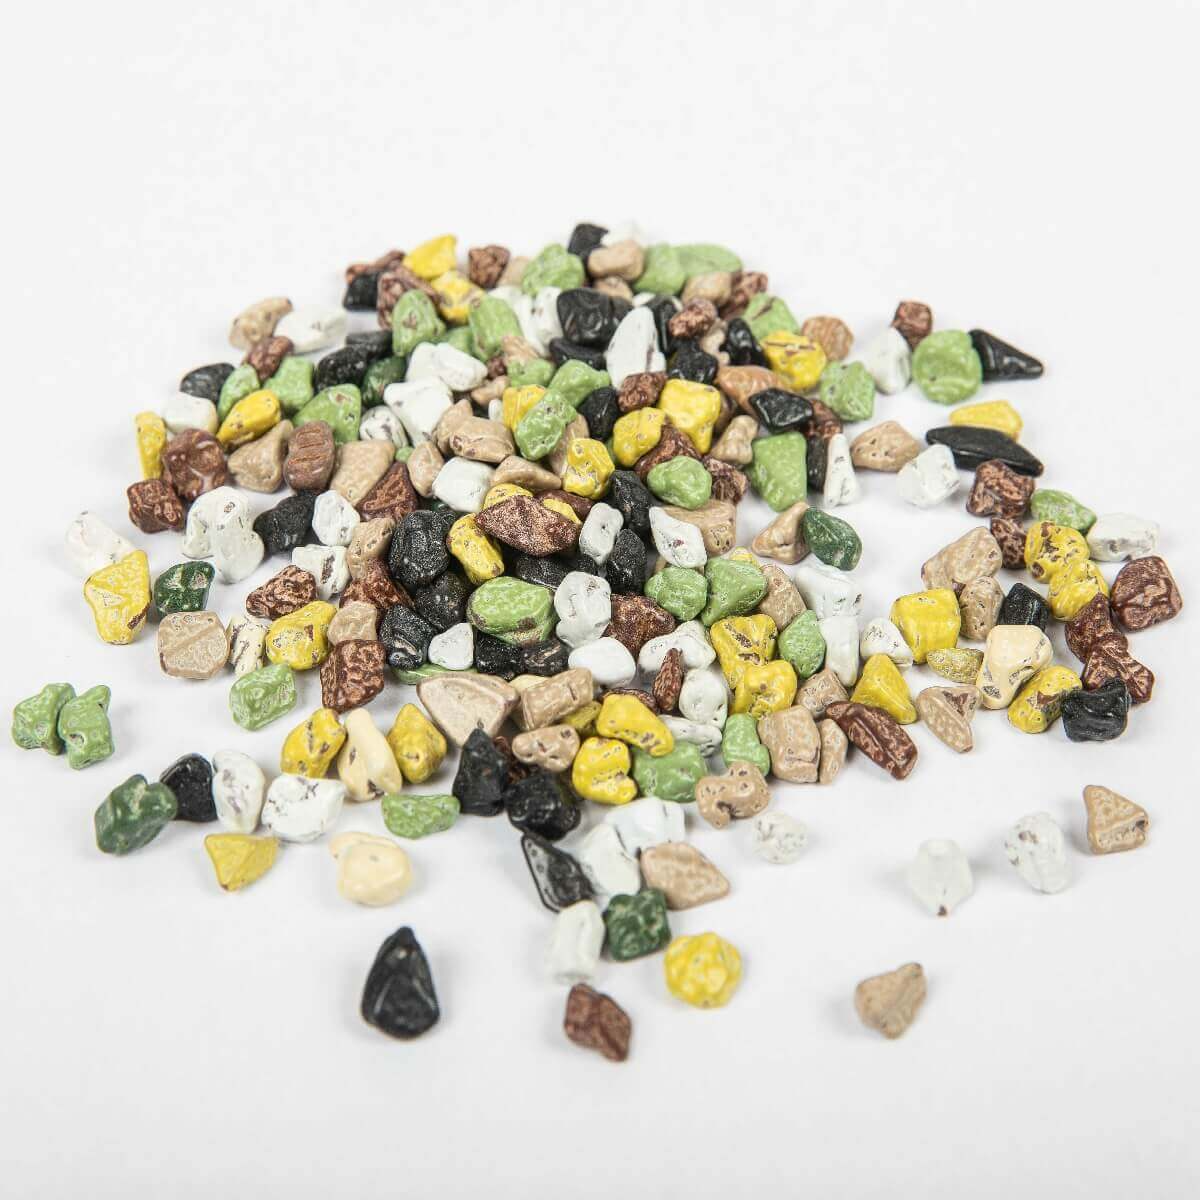 Turkish Candy Rocks, Mixed Colors Crystal Chocolate Candies